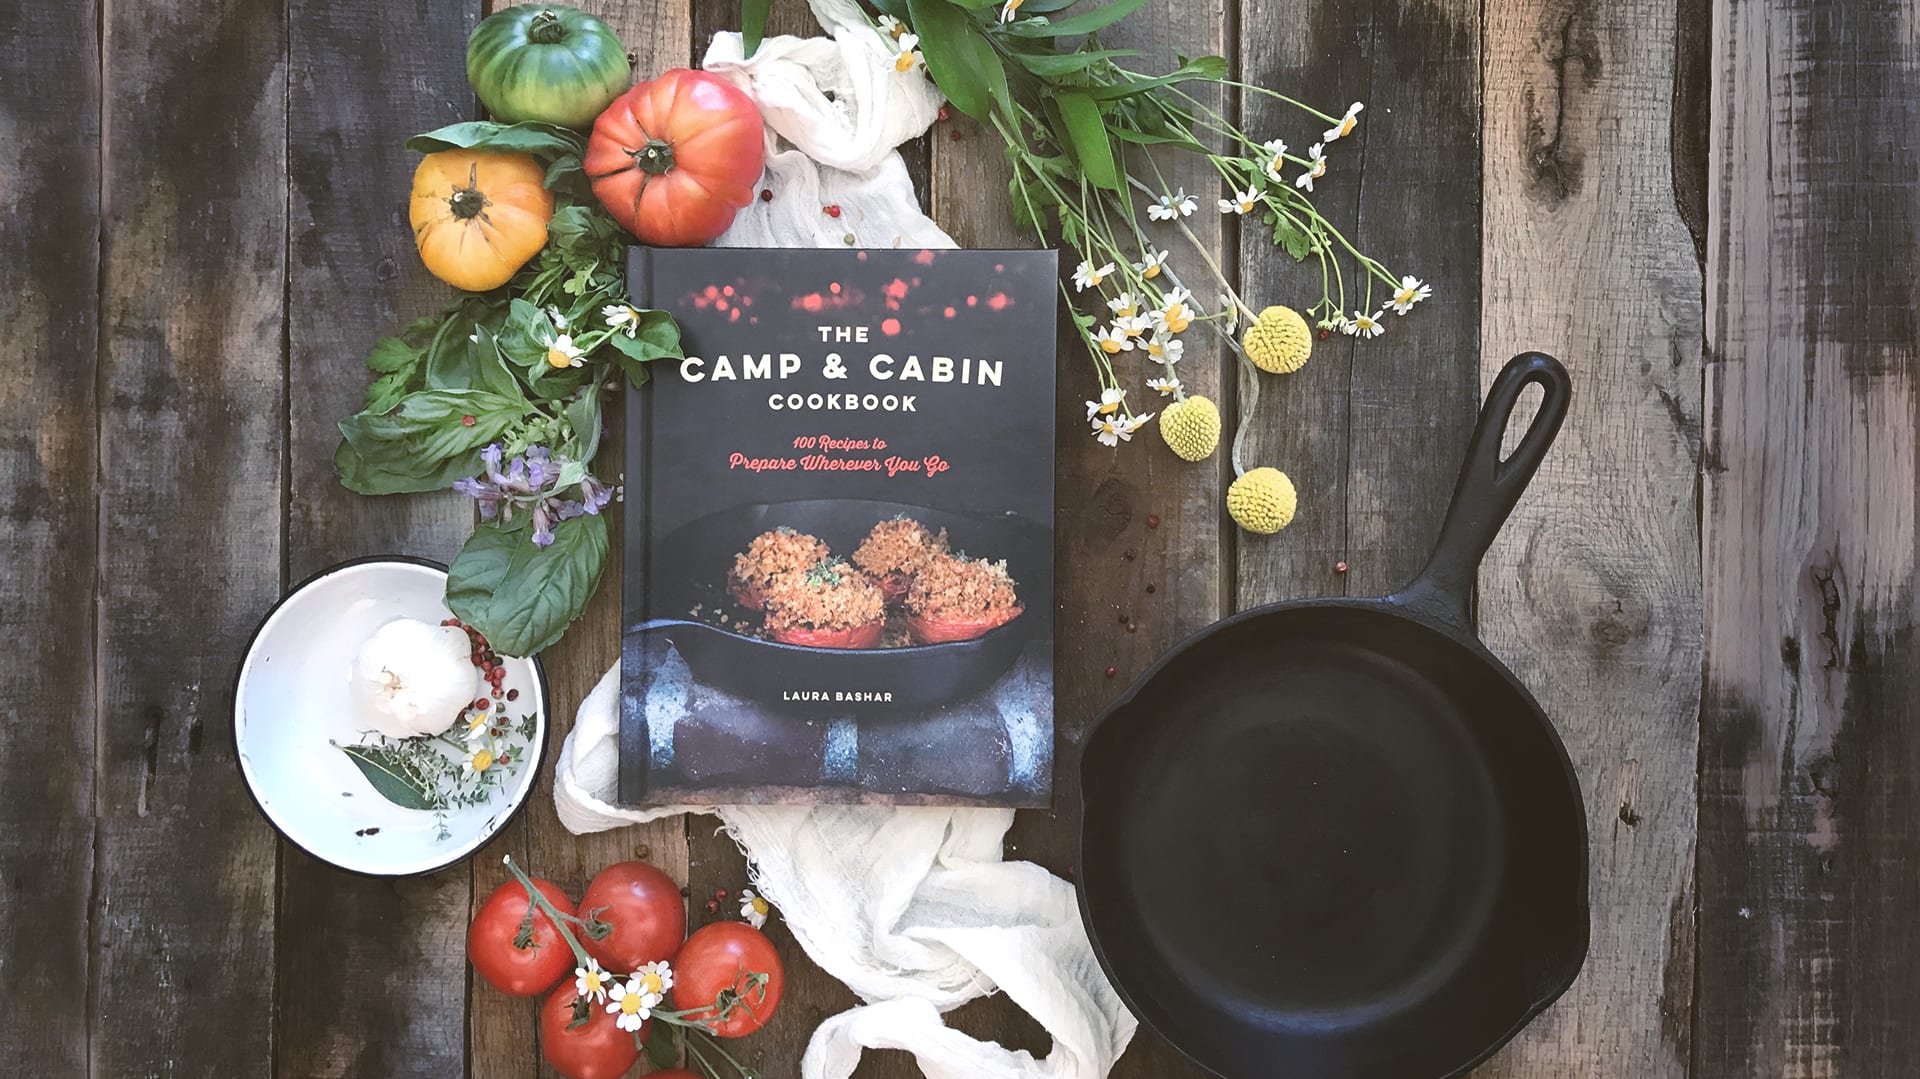 For healthier Dutch oven cooking, try these 5 gourmet camp recipes -  Scouting magazine